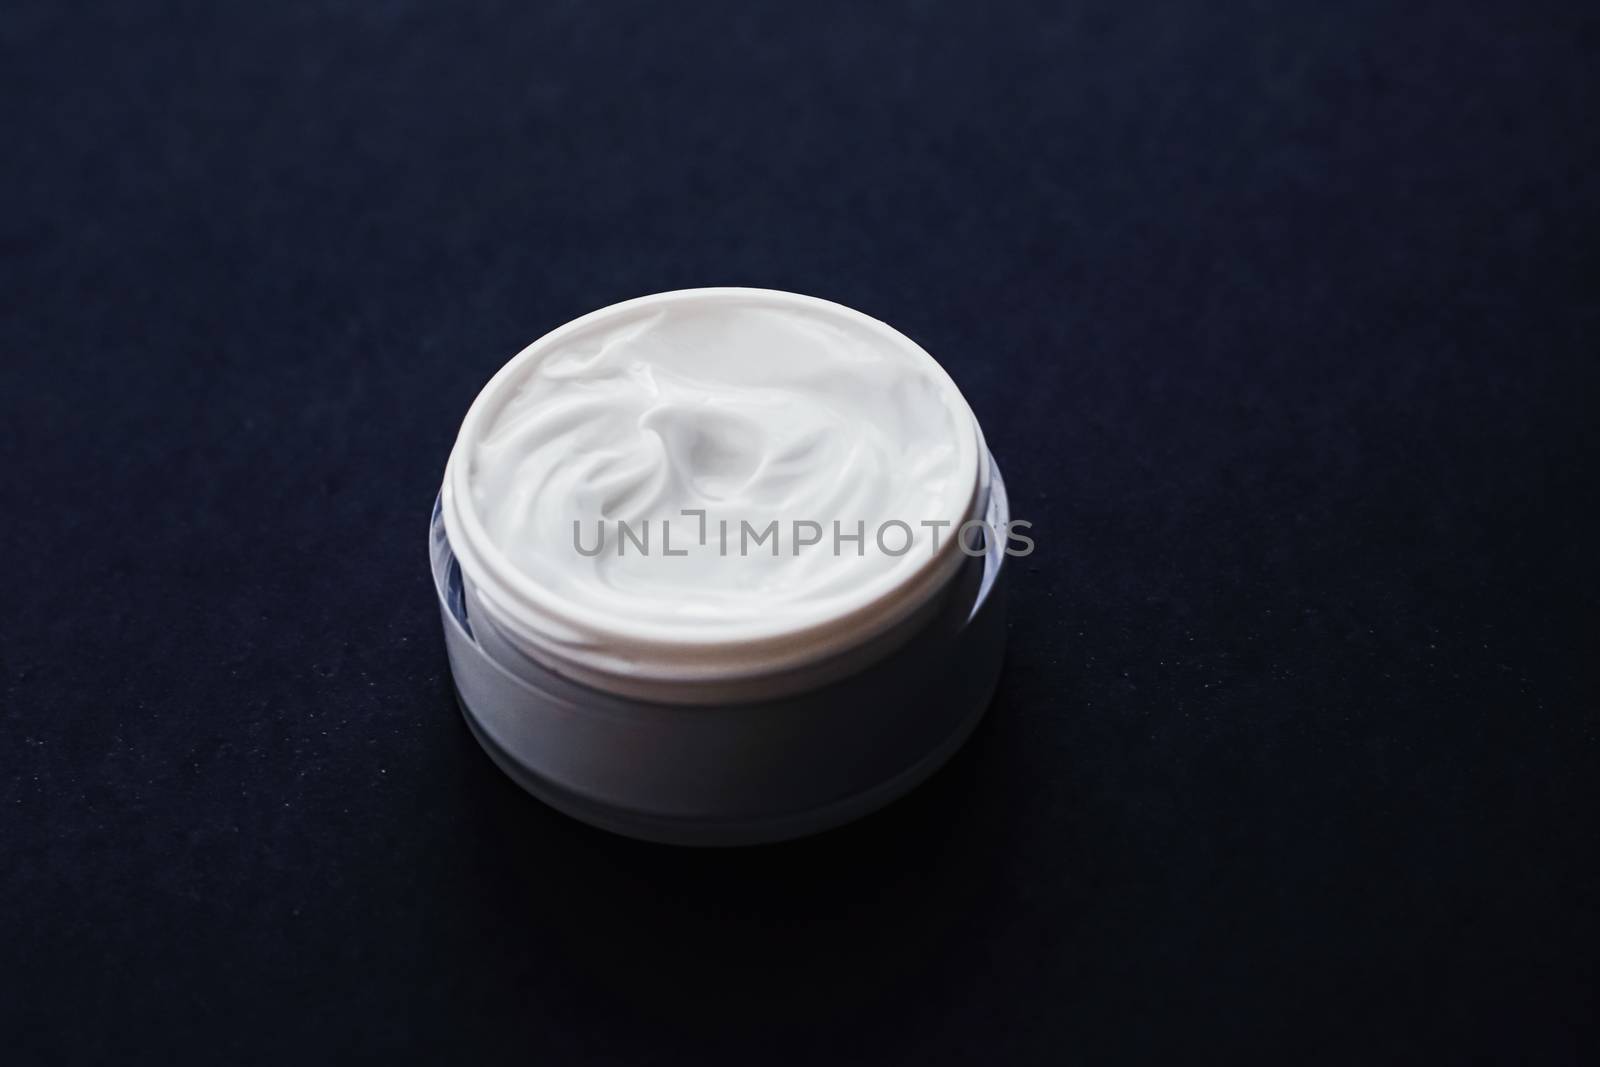 Face cream moisturizer, luxury skincare and anti-aging cosmetics, minimalistic design and brand product by Anneleven